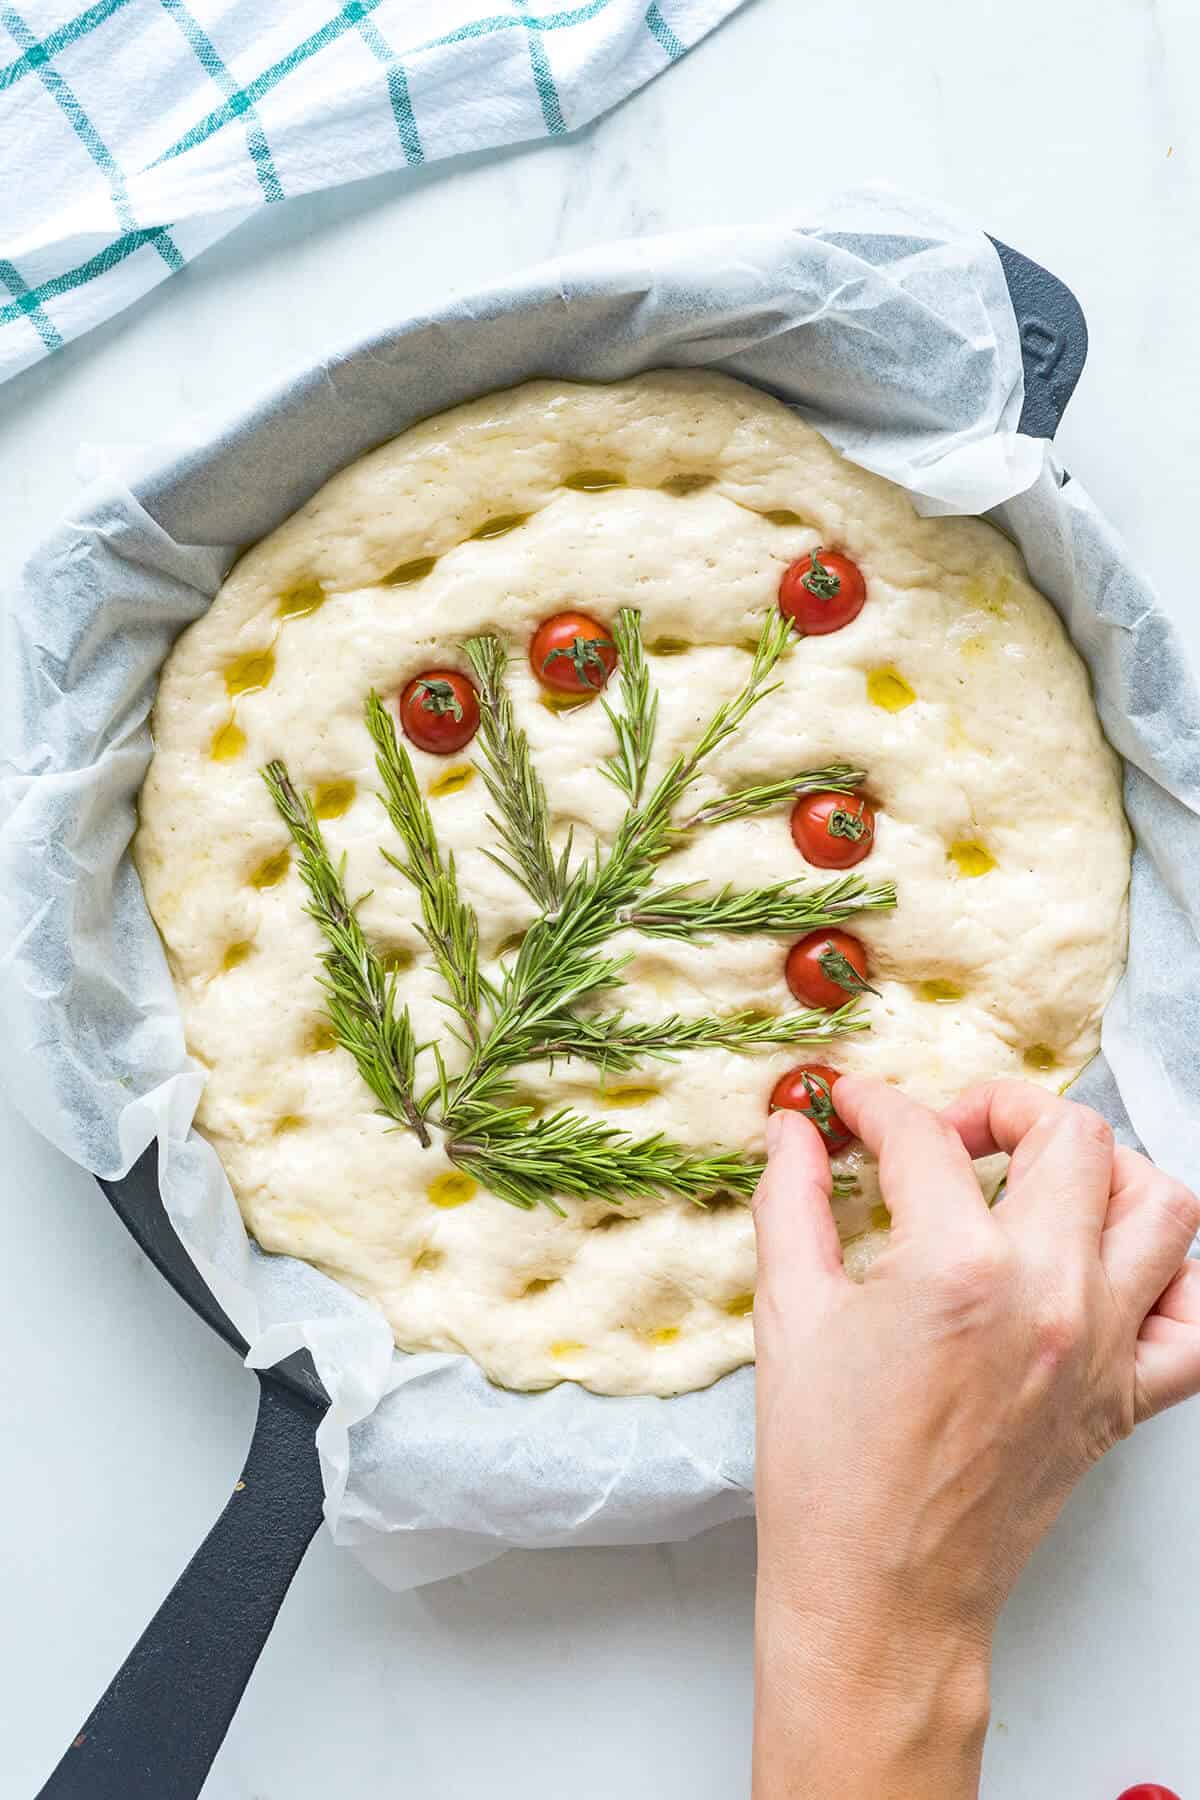 Creating a Christmas tree on the dough with rosemary sprigs and cherry tomatoes.